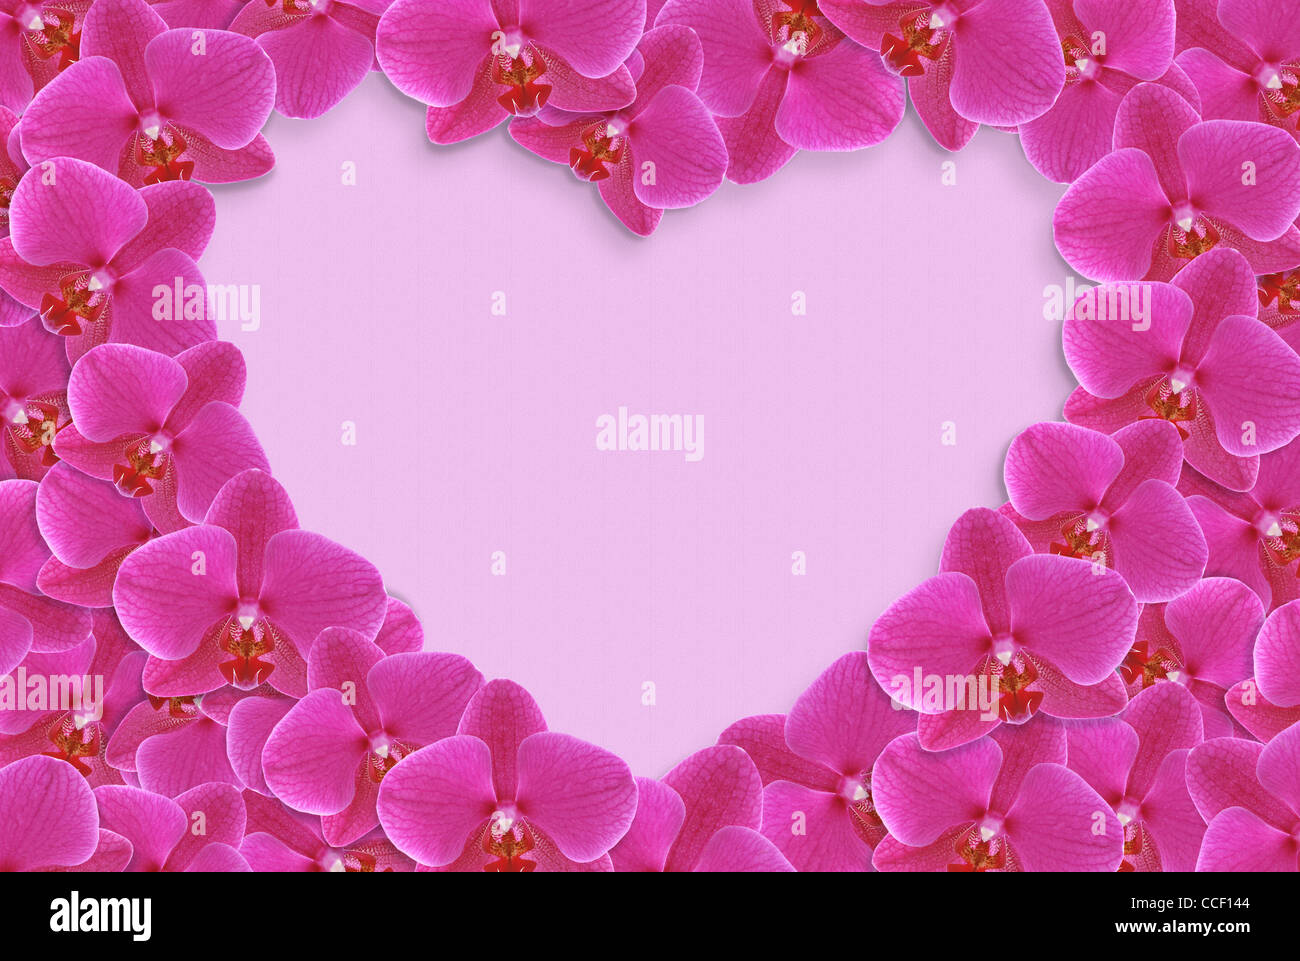 Heart made of flowers on lilac background Stock Photo